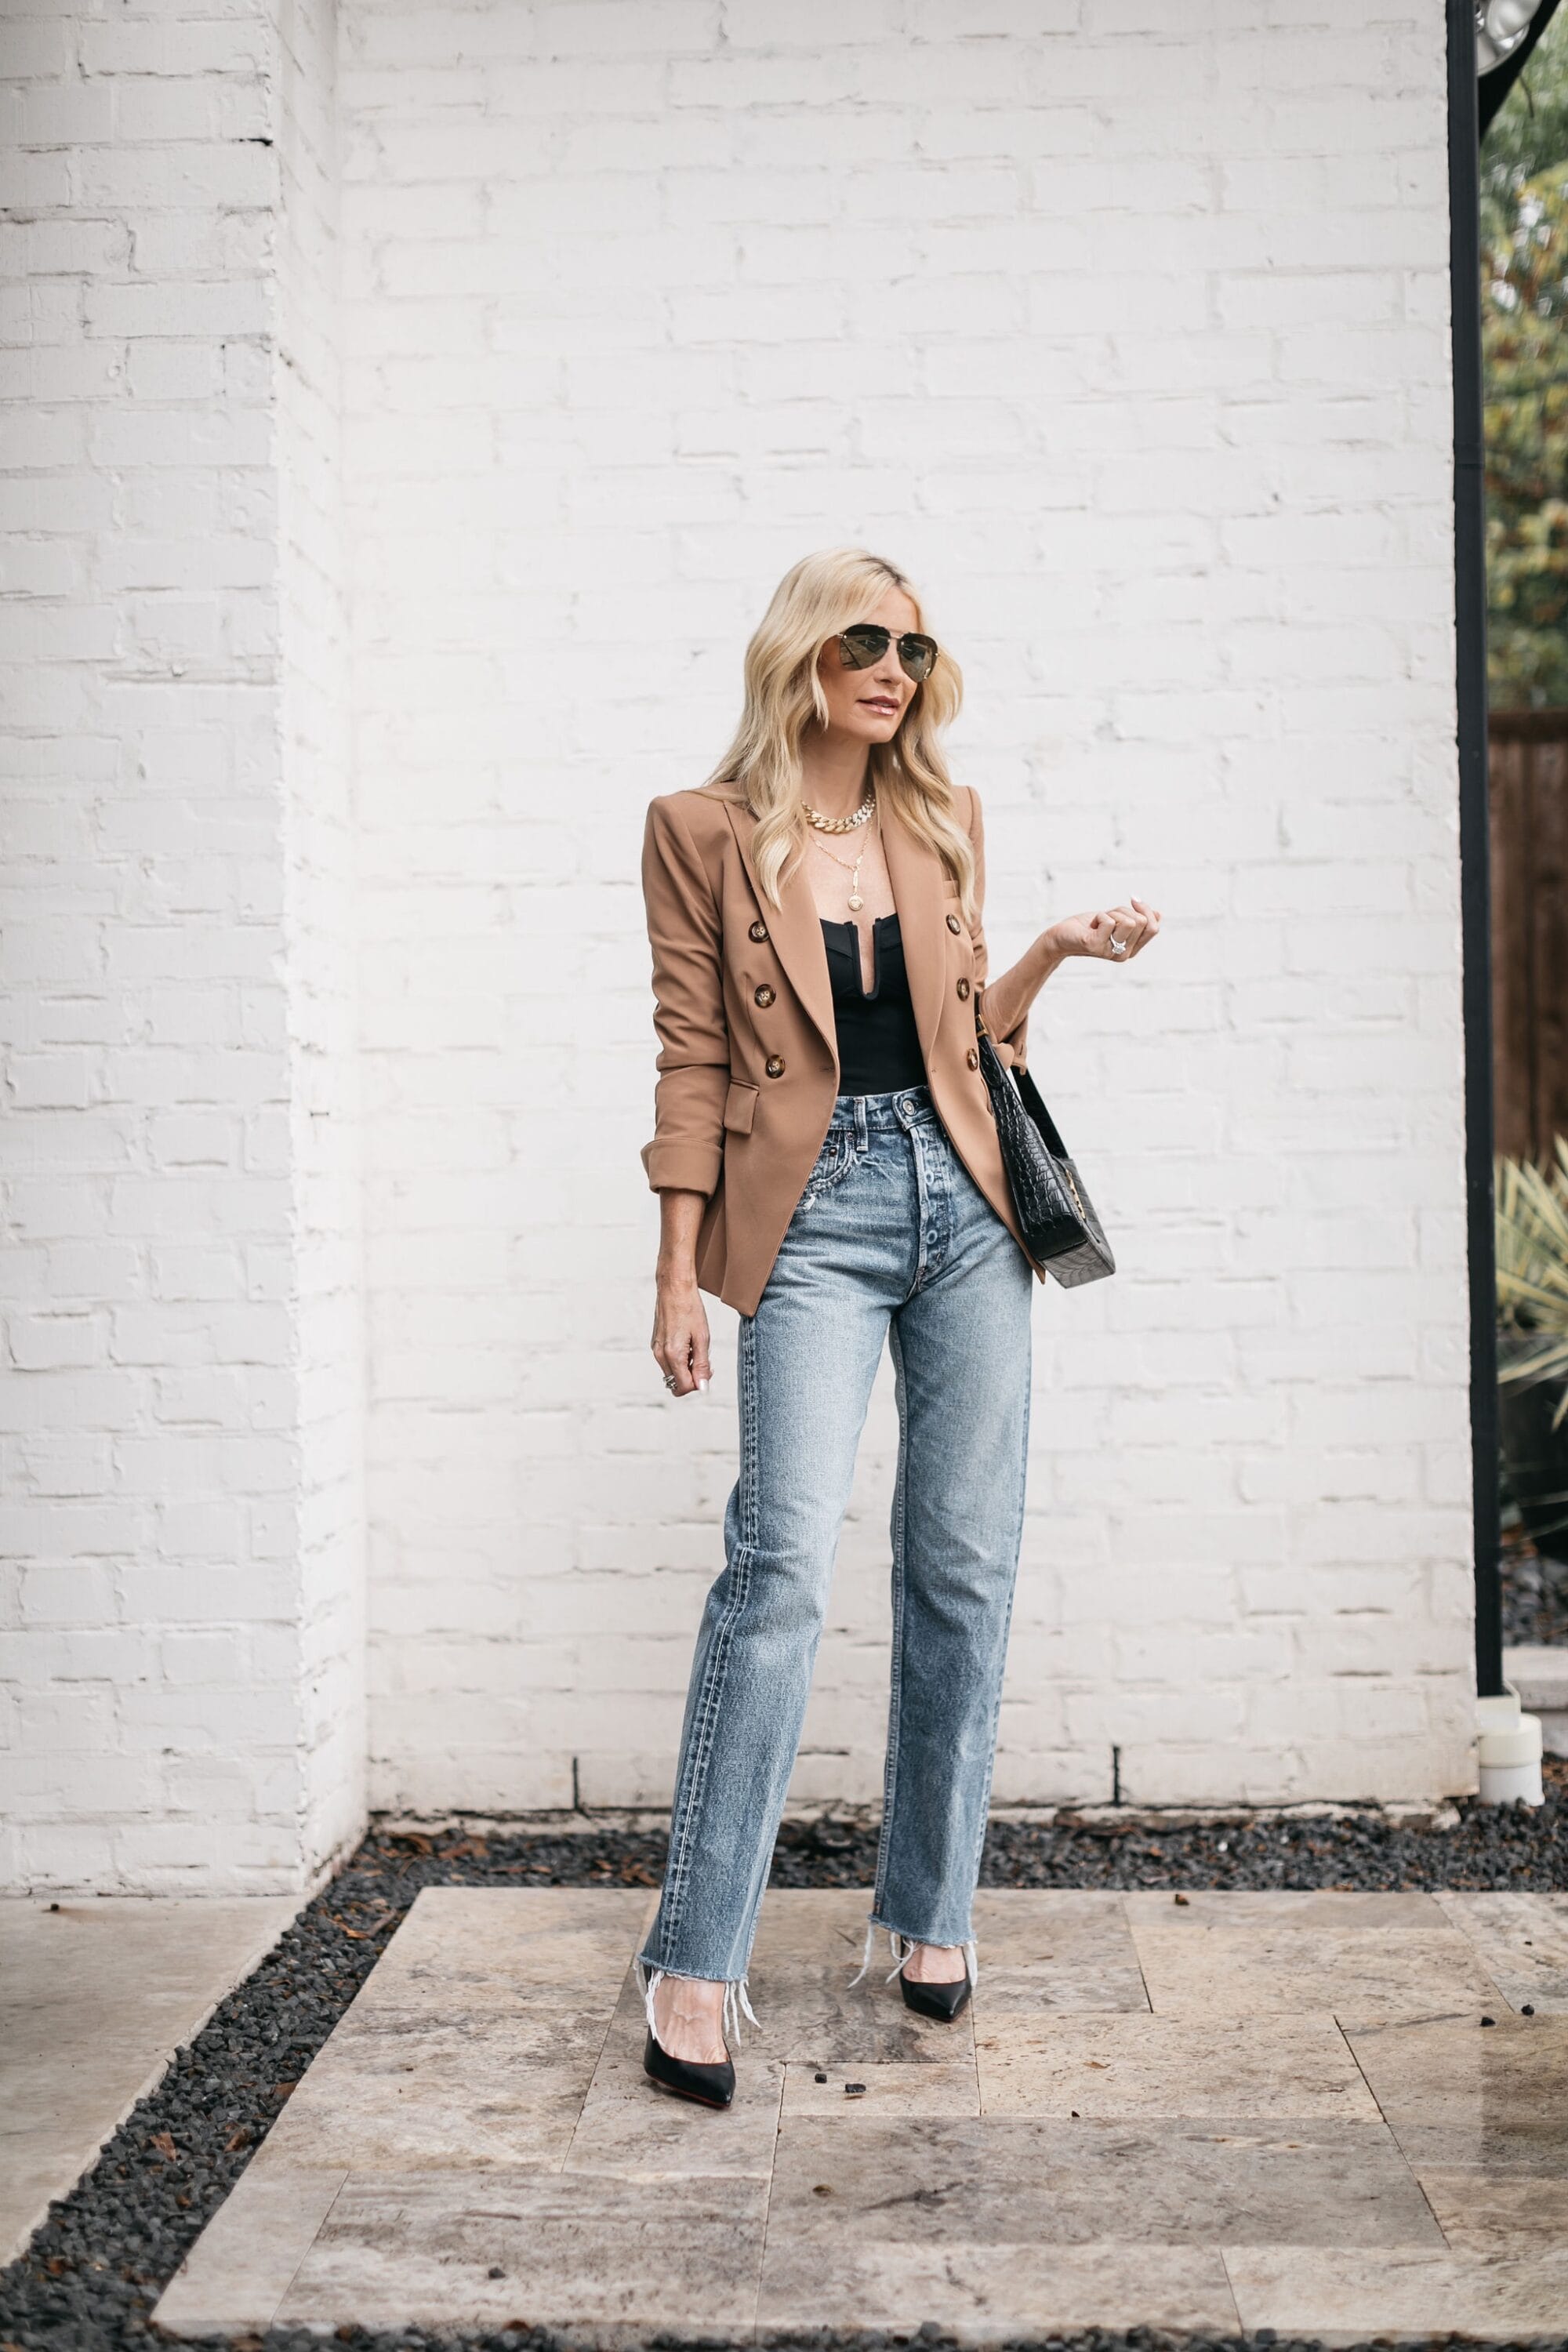 Dallas woman over 40 wearing veronica beard camel blazer with straight leg jeans and black bodysuit.